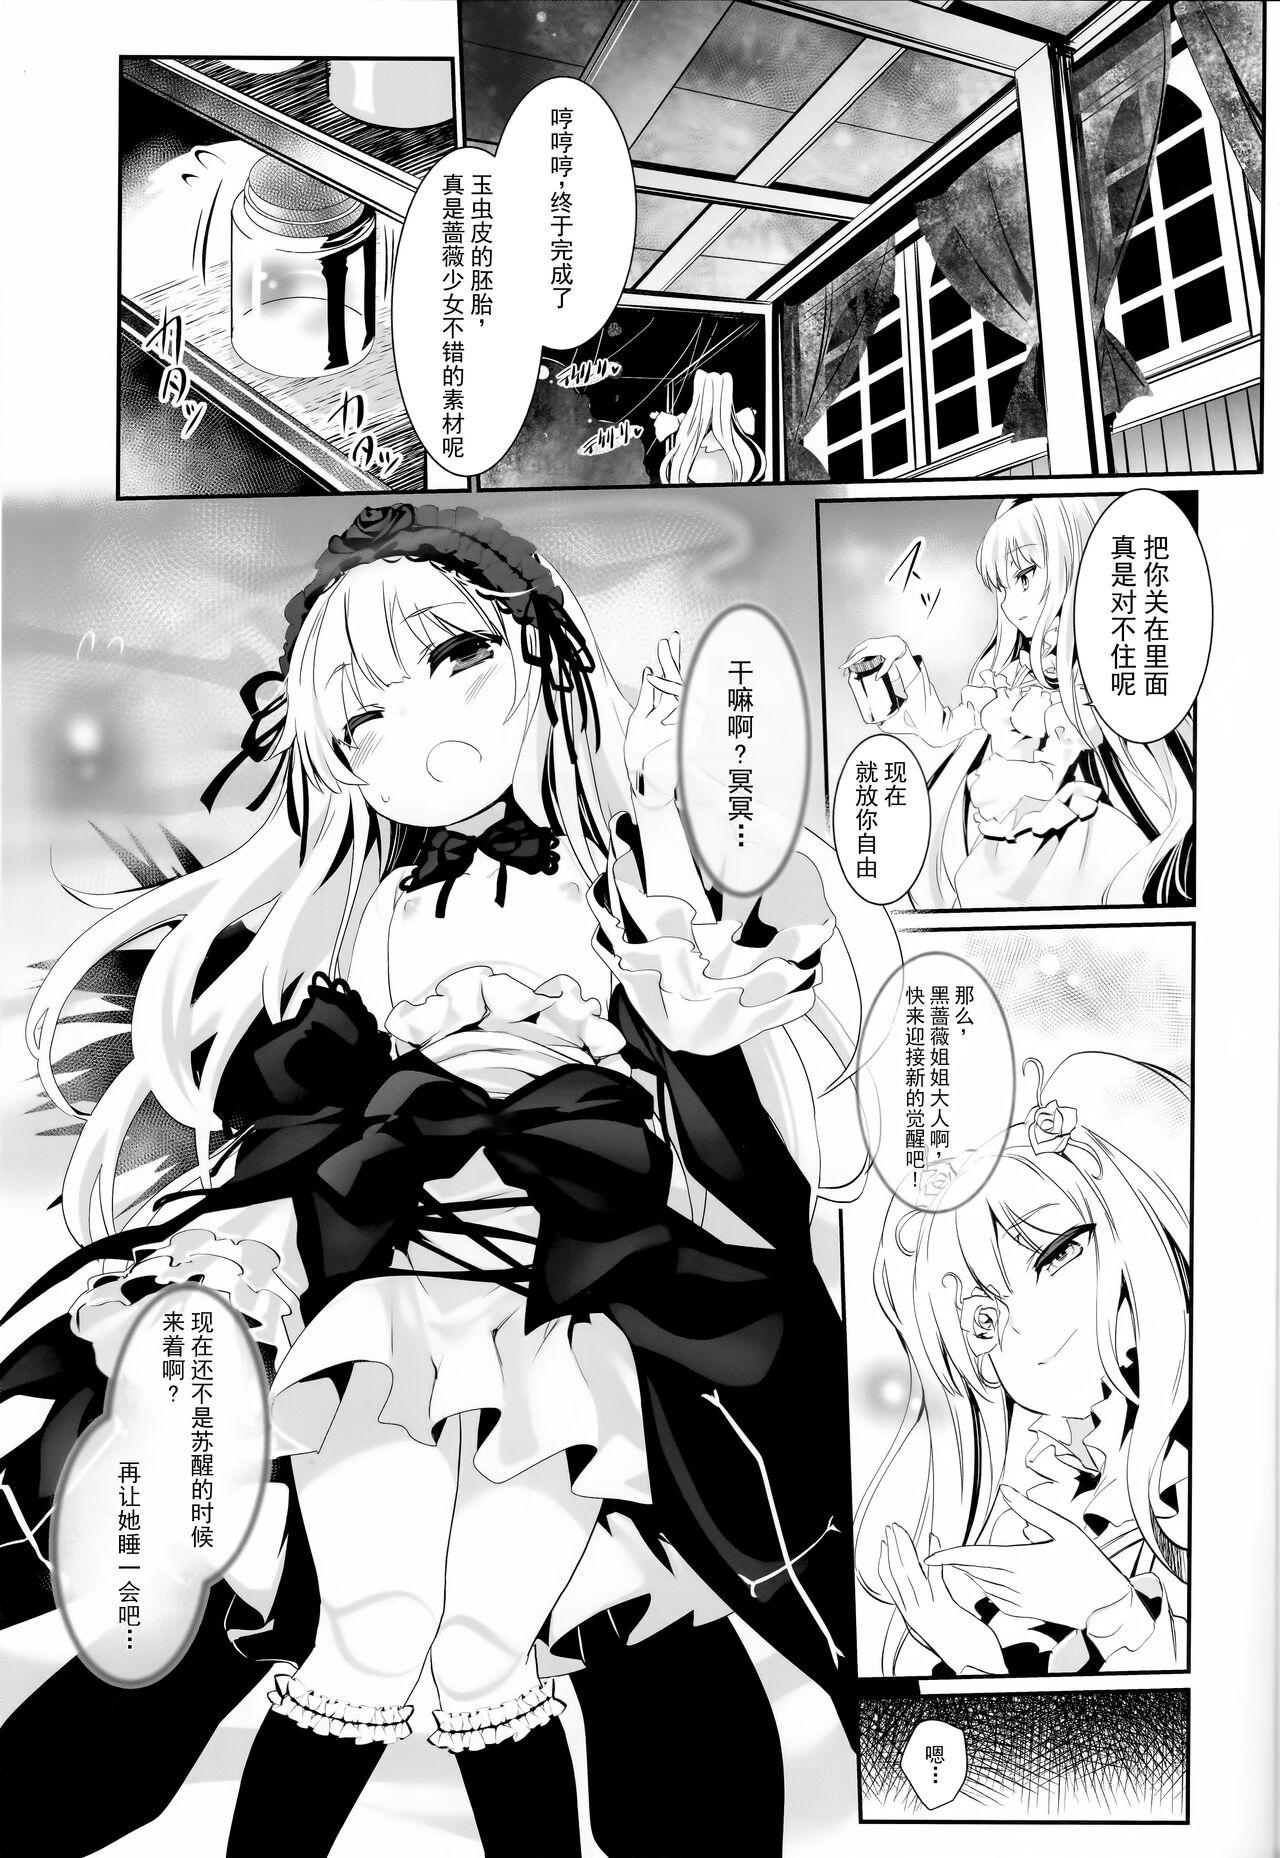 Gayemo Glamour Growth - Rozen maiden Shaven - Page 2